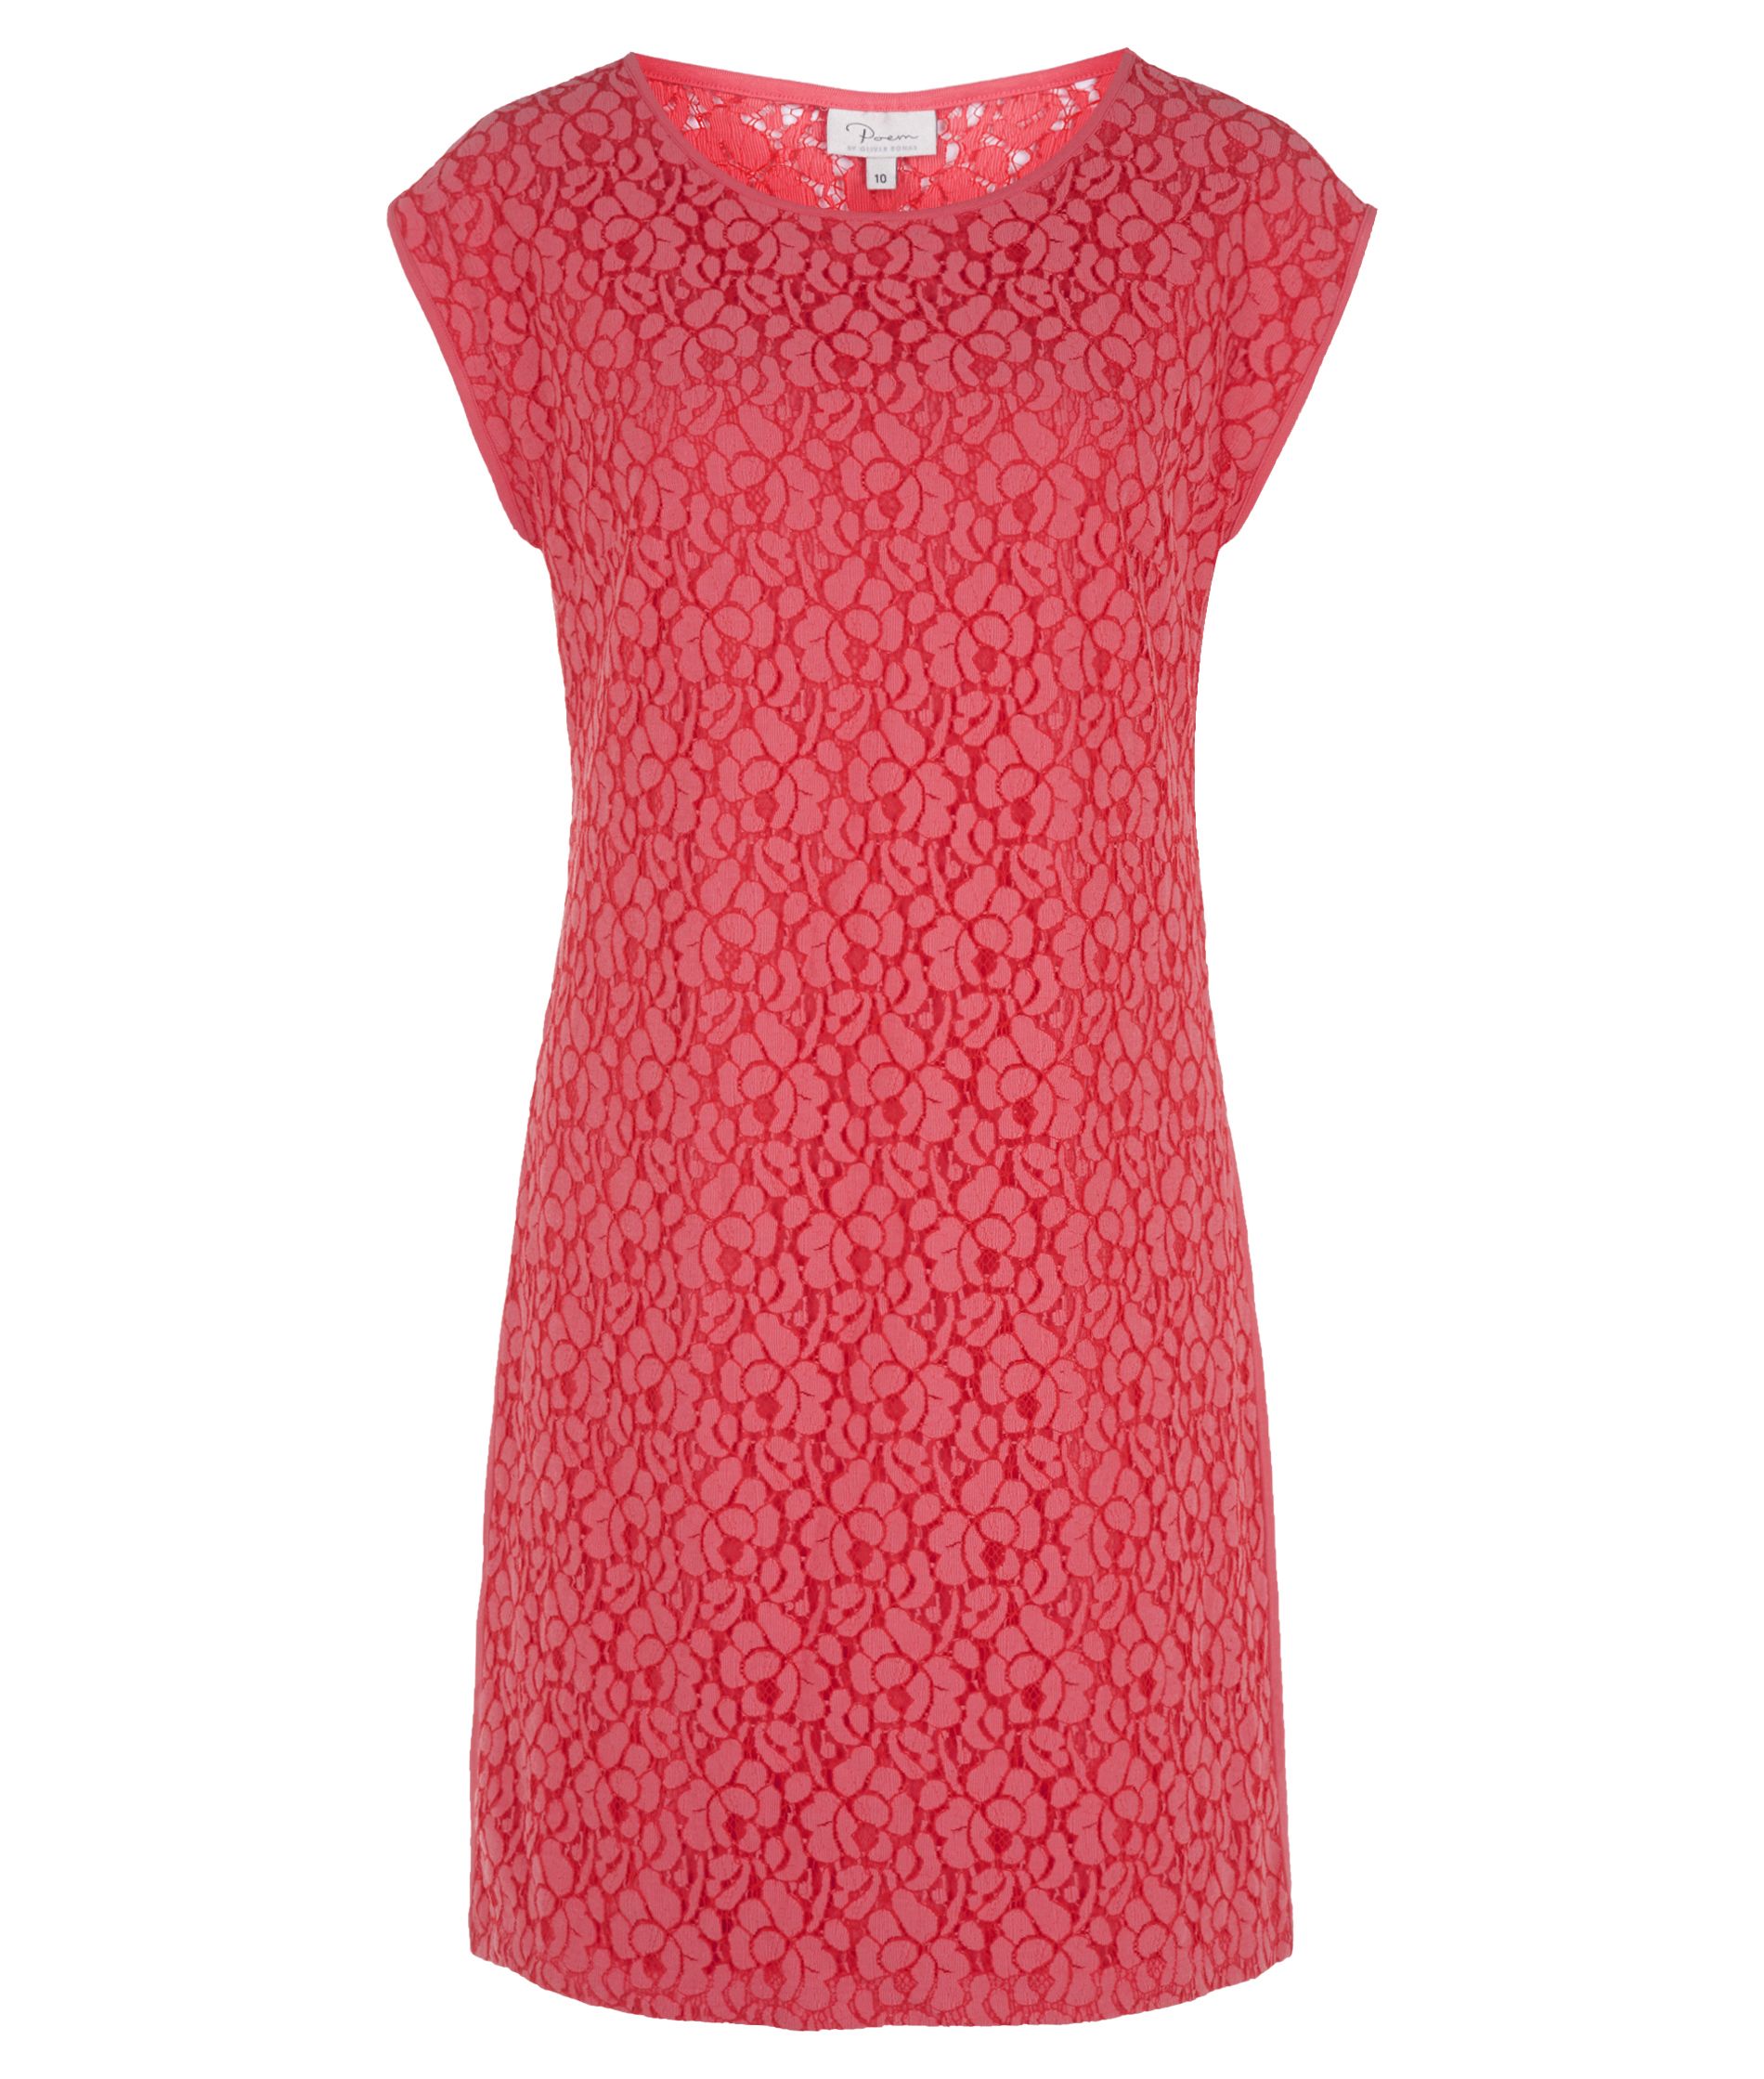 Lace Front Jersey Dress by Poem | Oliver Bonas